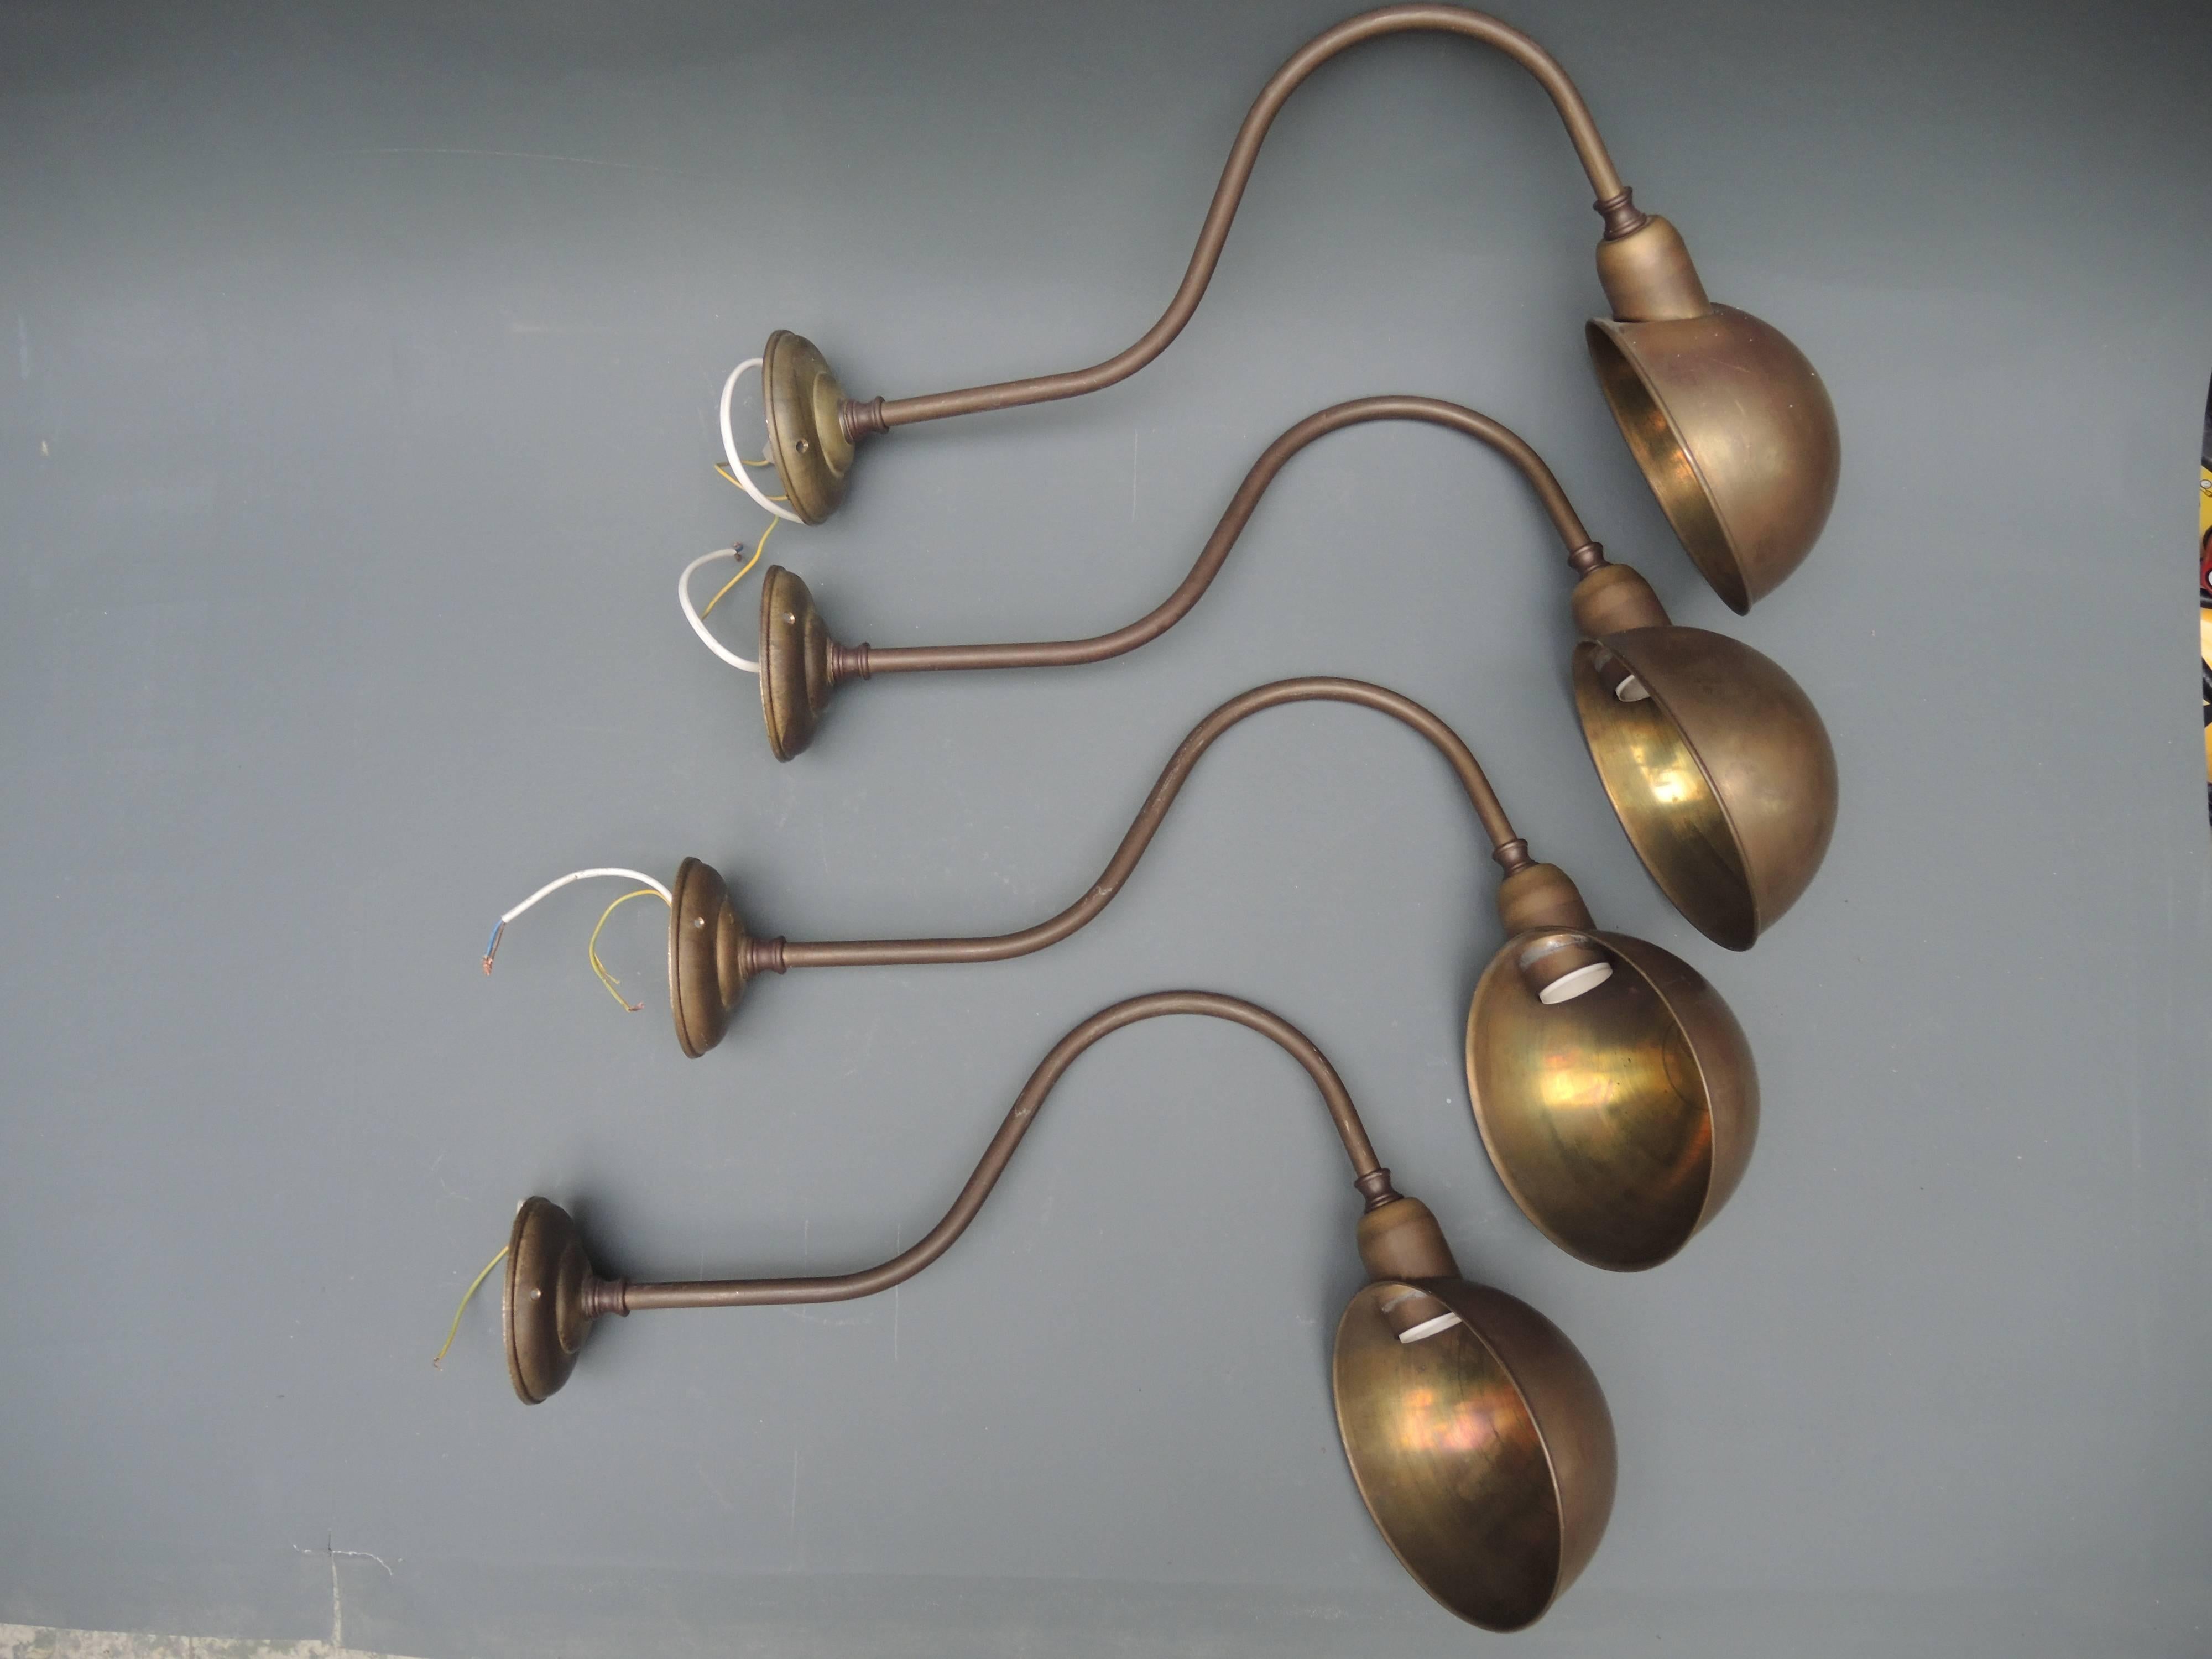 Four 1930s French brass wall lamps to be used to light bookcases or a shop sign. All in very good condition and ready to use.
